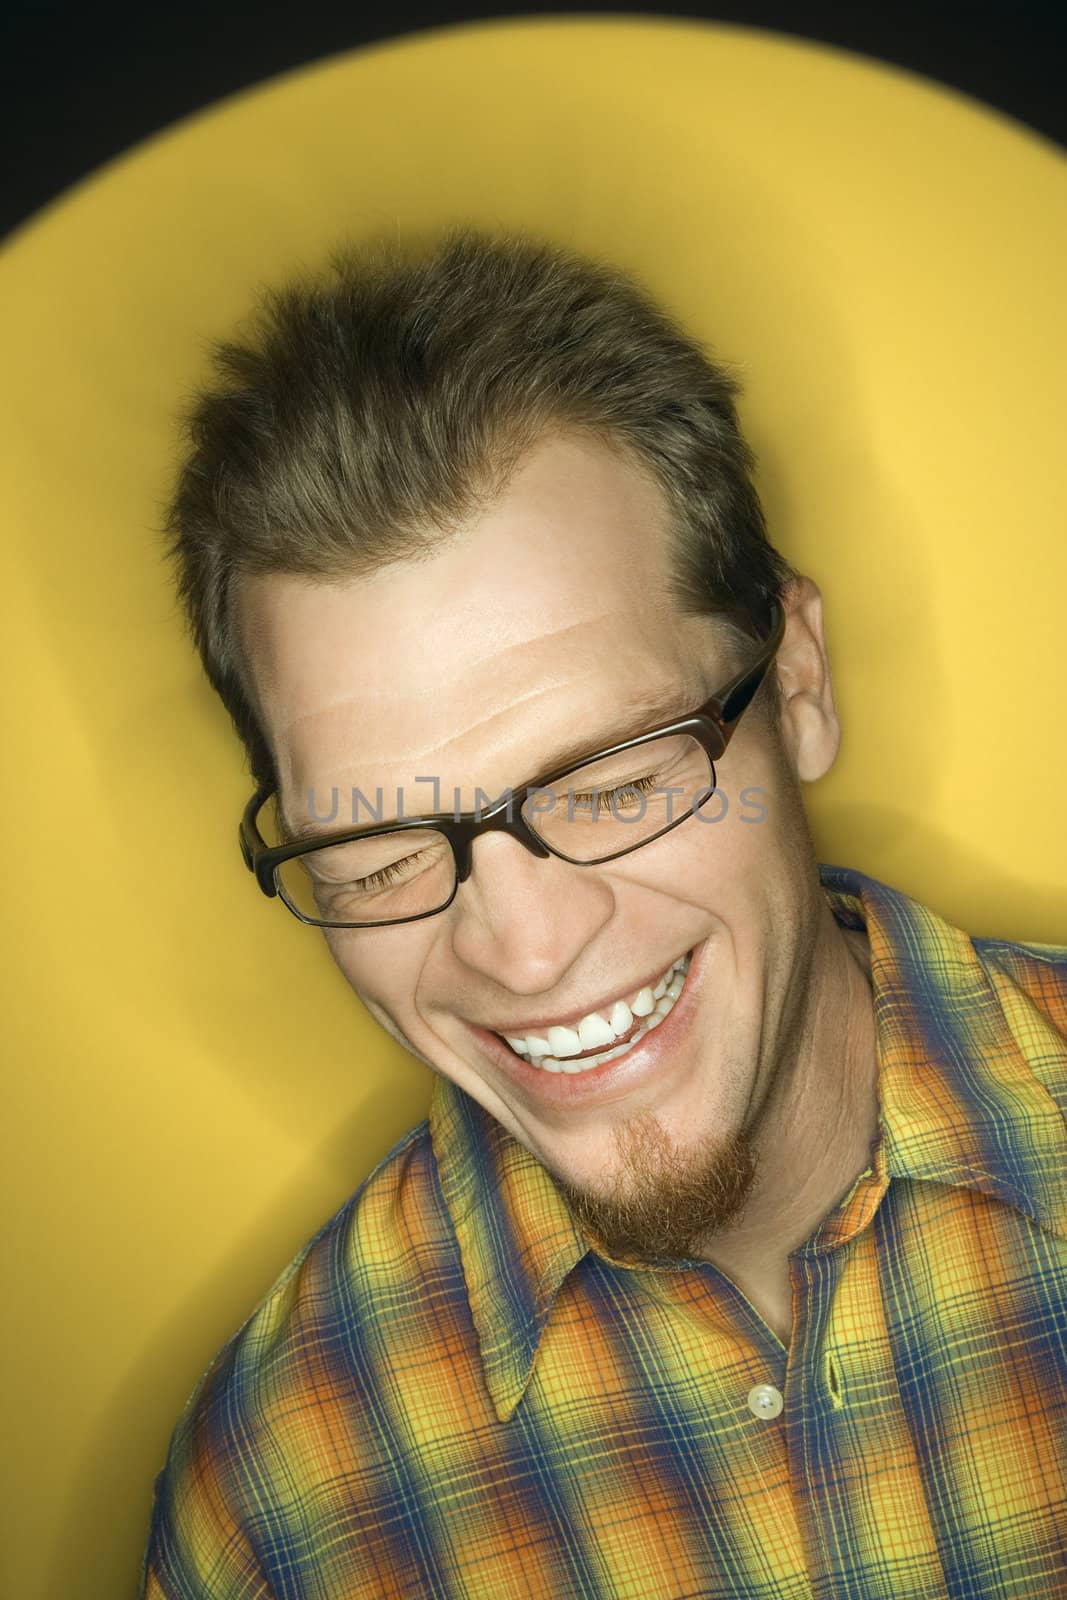 Vignette of adult Caucasian man on yellow background laughing.